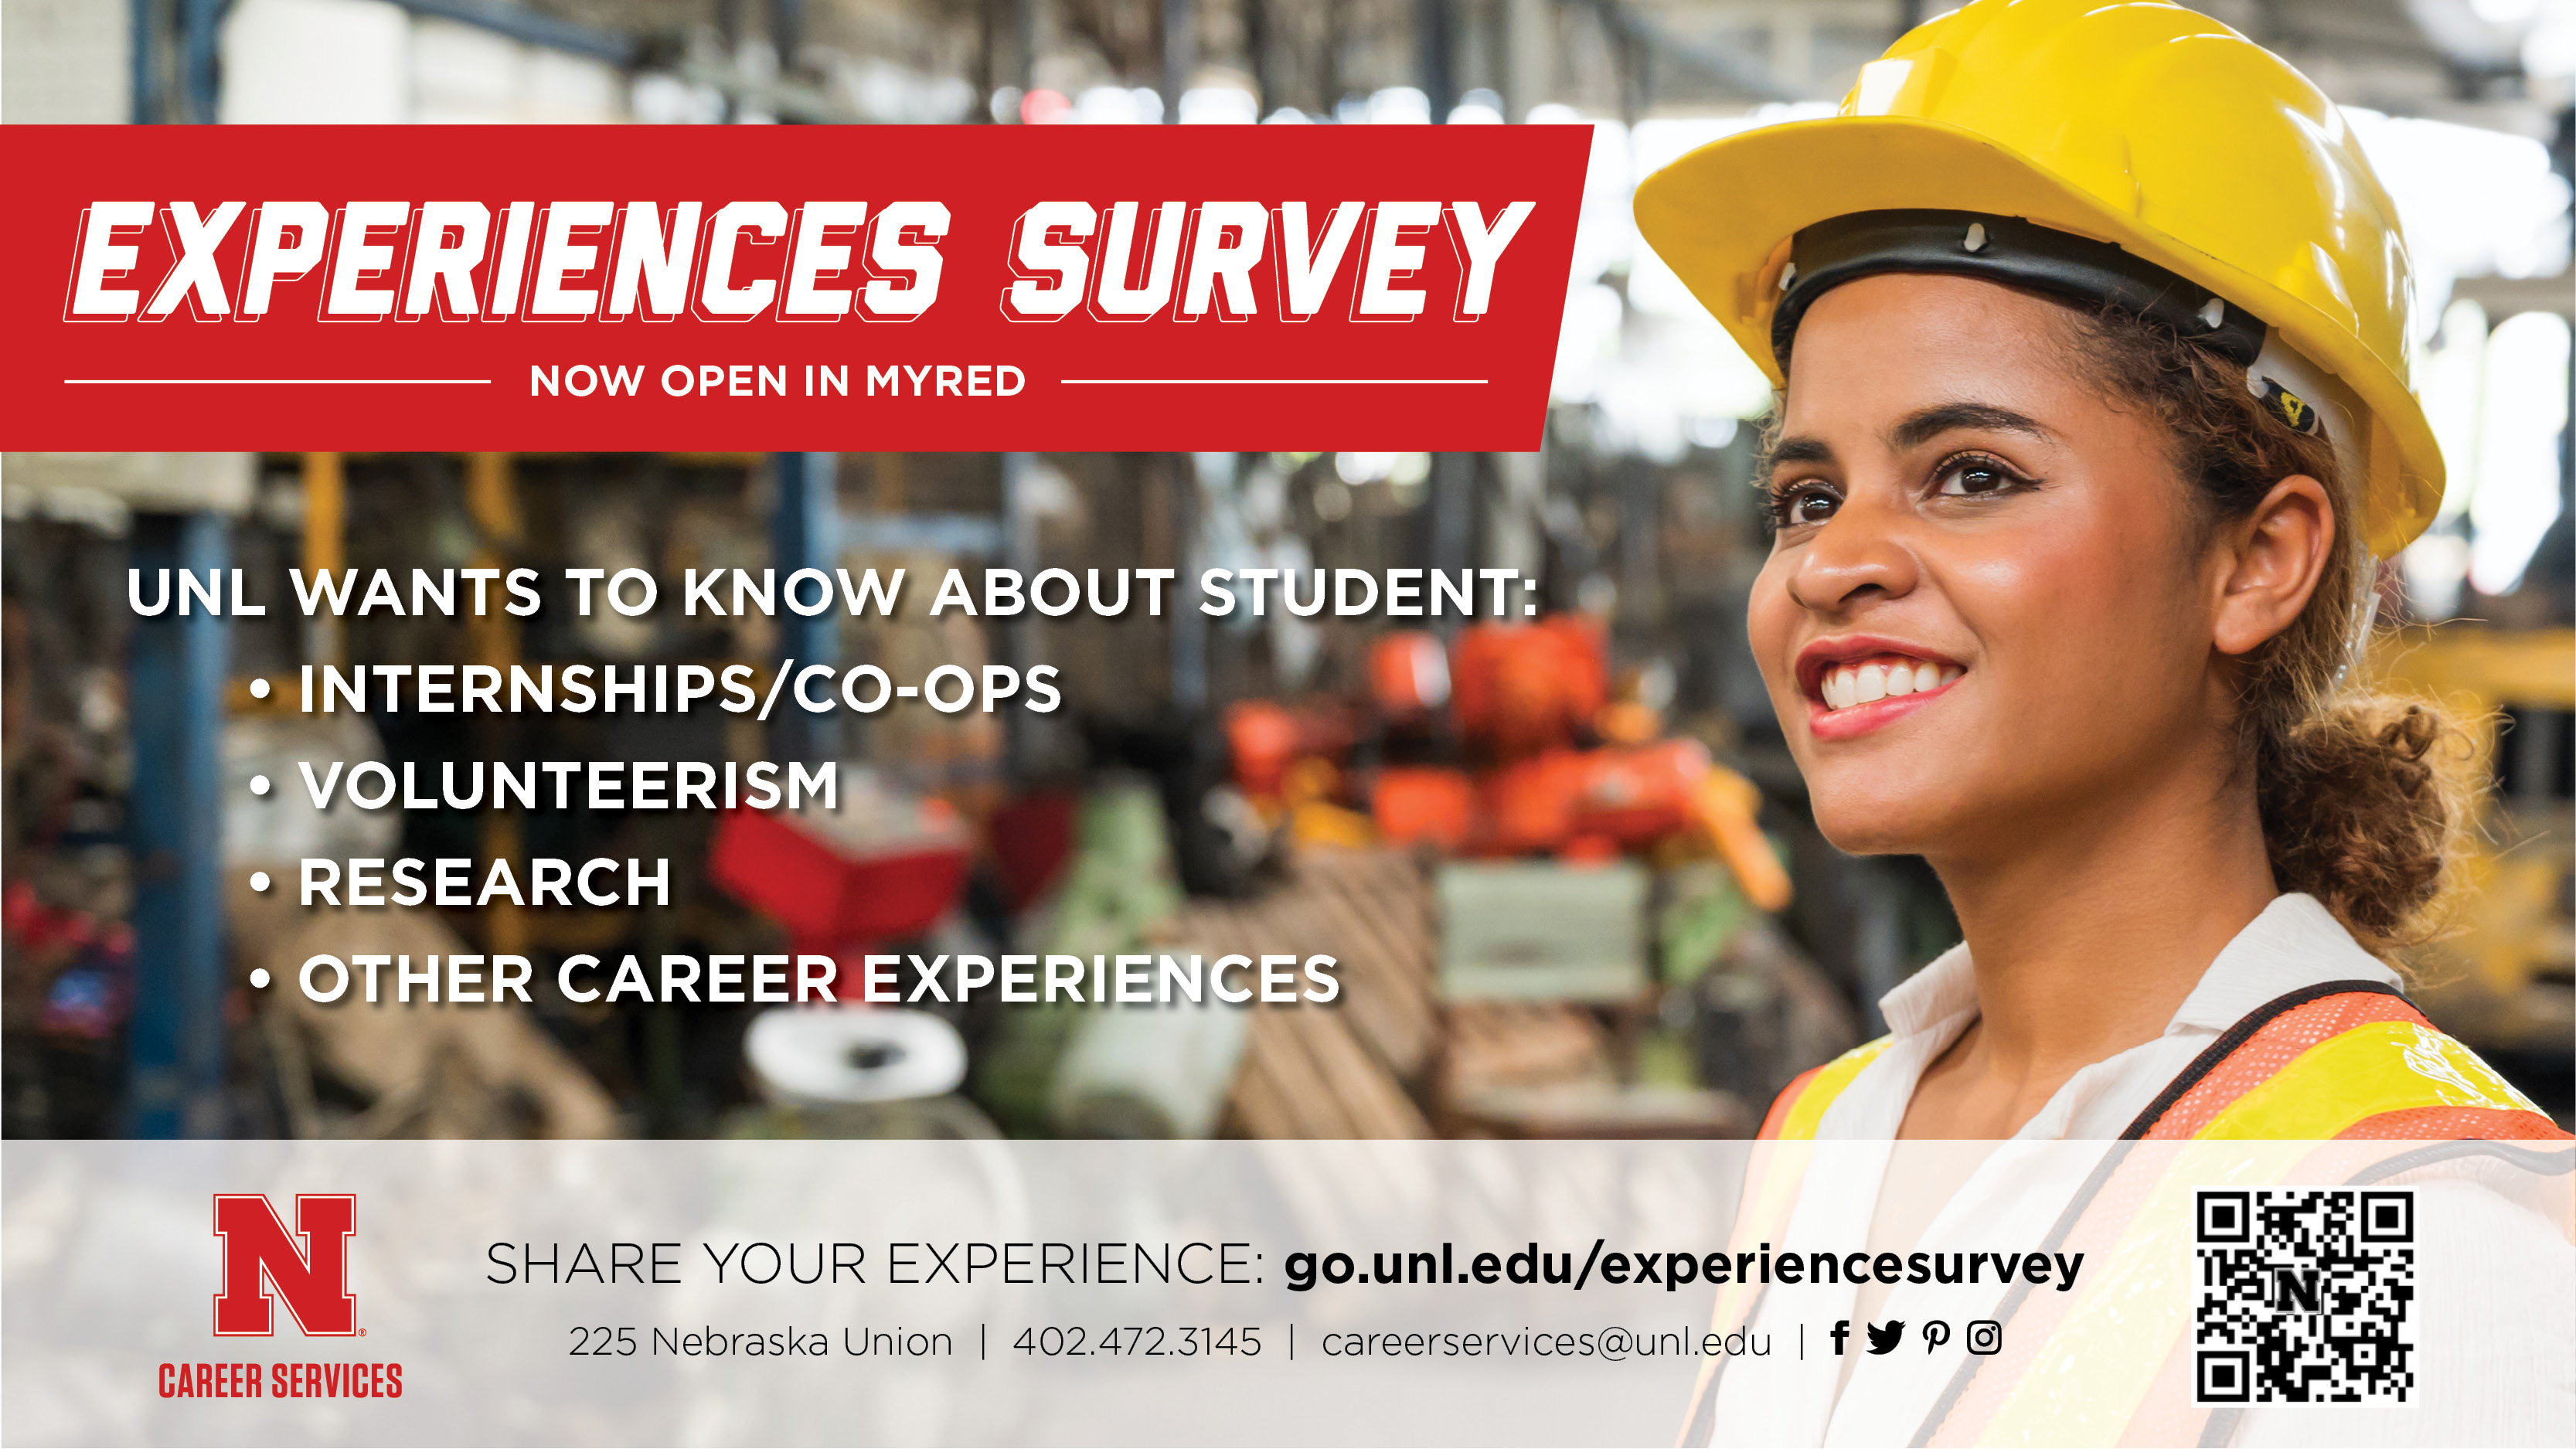 Complete the Fall 2020 Experiences Survey in MyRED